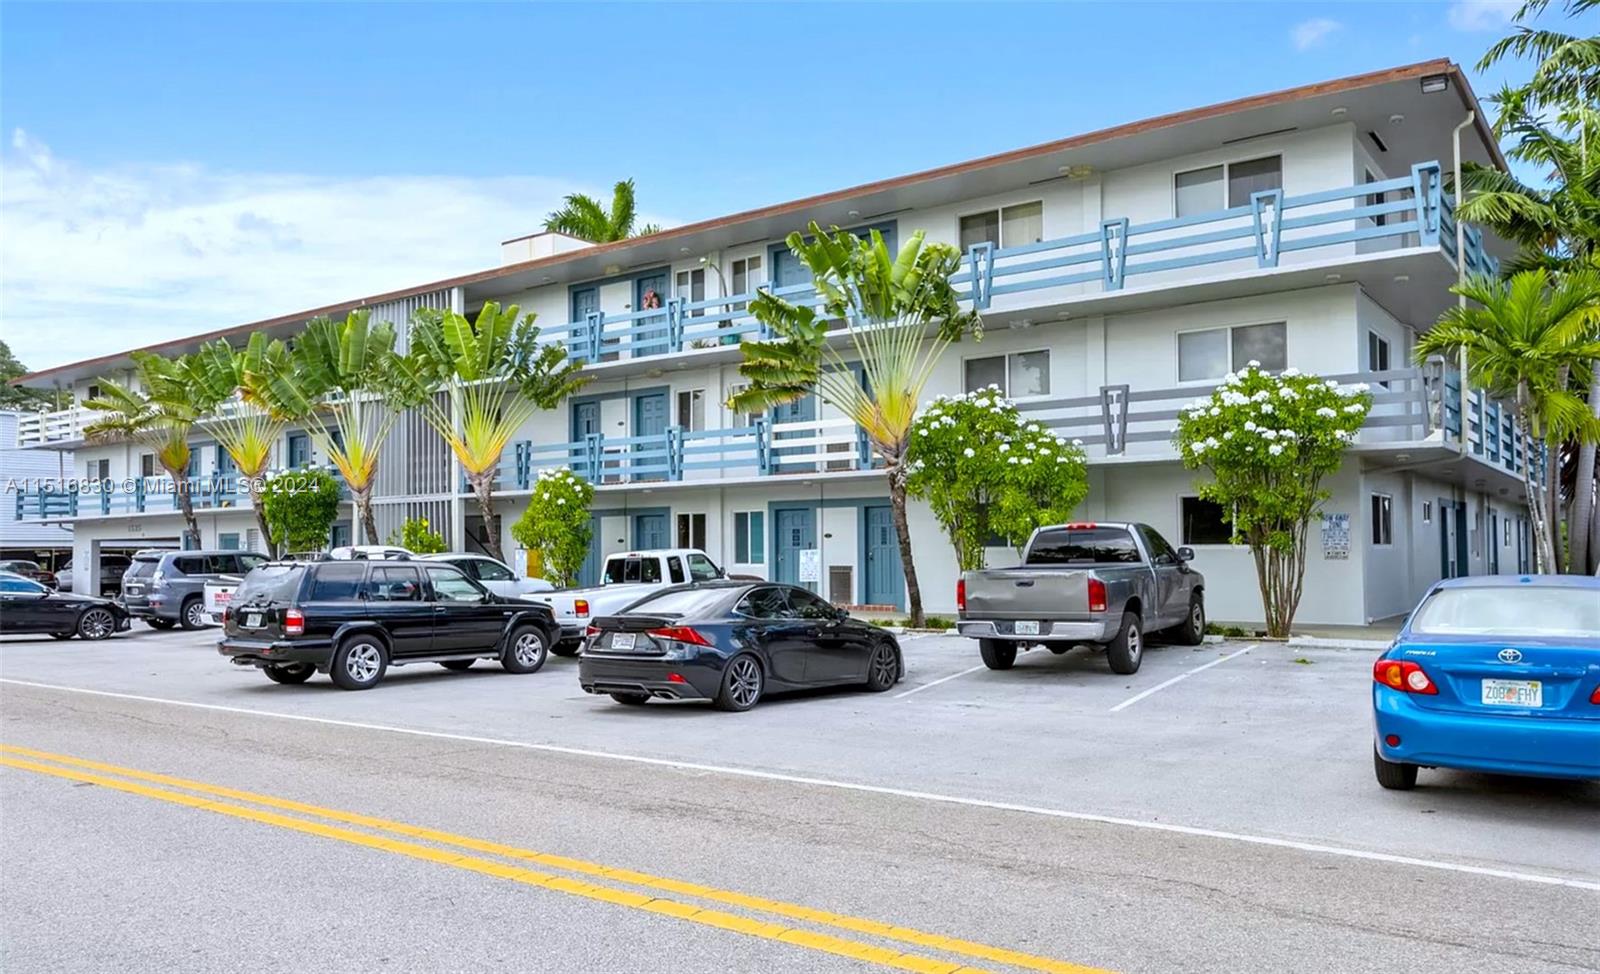 1535 SE 15th St 304, Fort Lauderdale, Florida 33316, 1 Bedroom Bedrooms, ,1 BathroomBathrooms,Residential,For Sale,1535 SE 15th St 304,A11516830